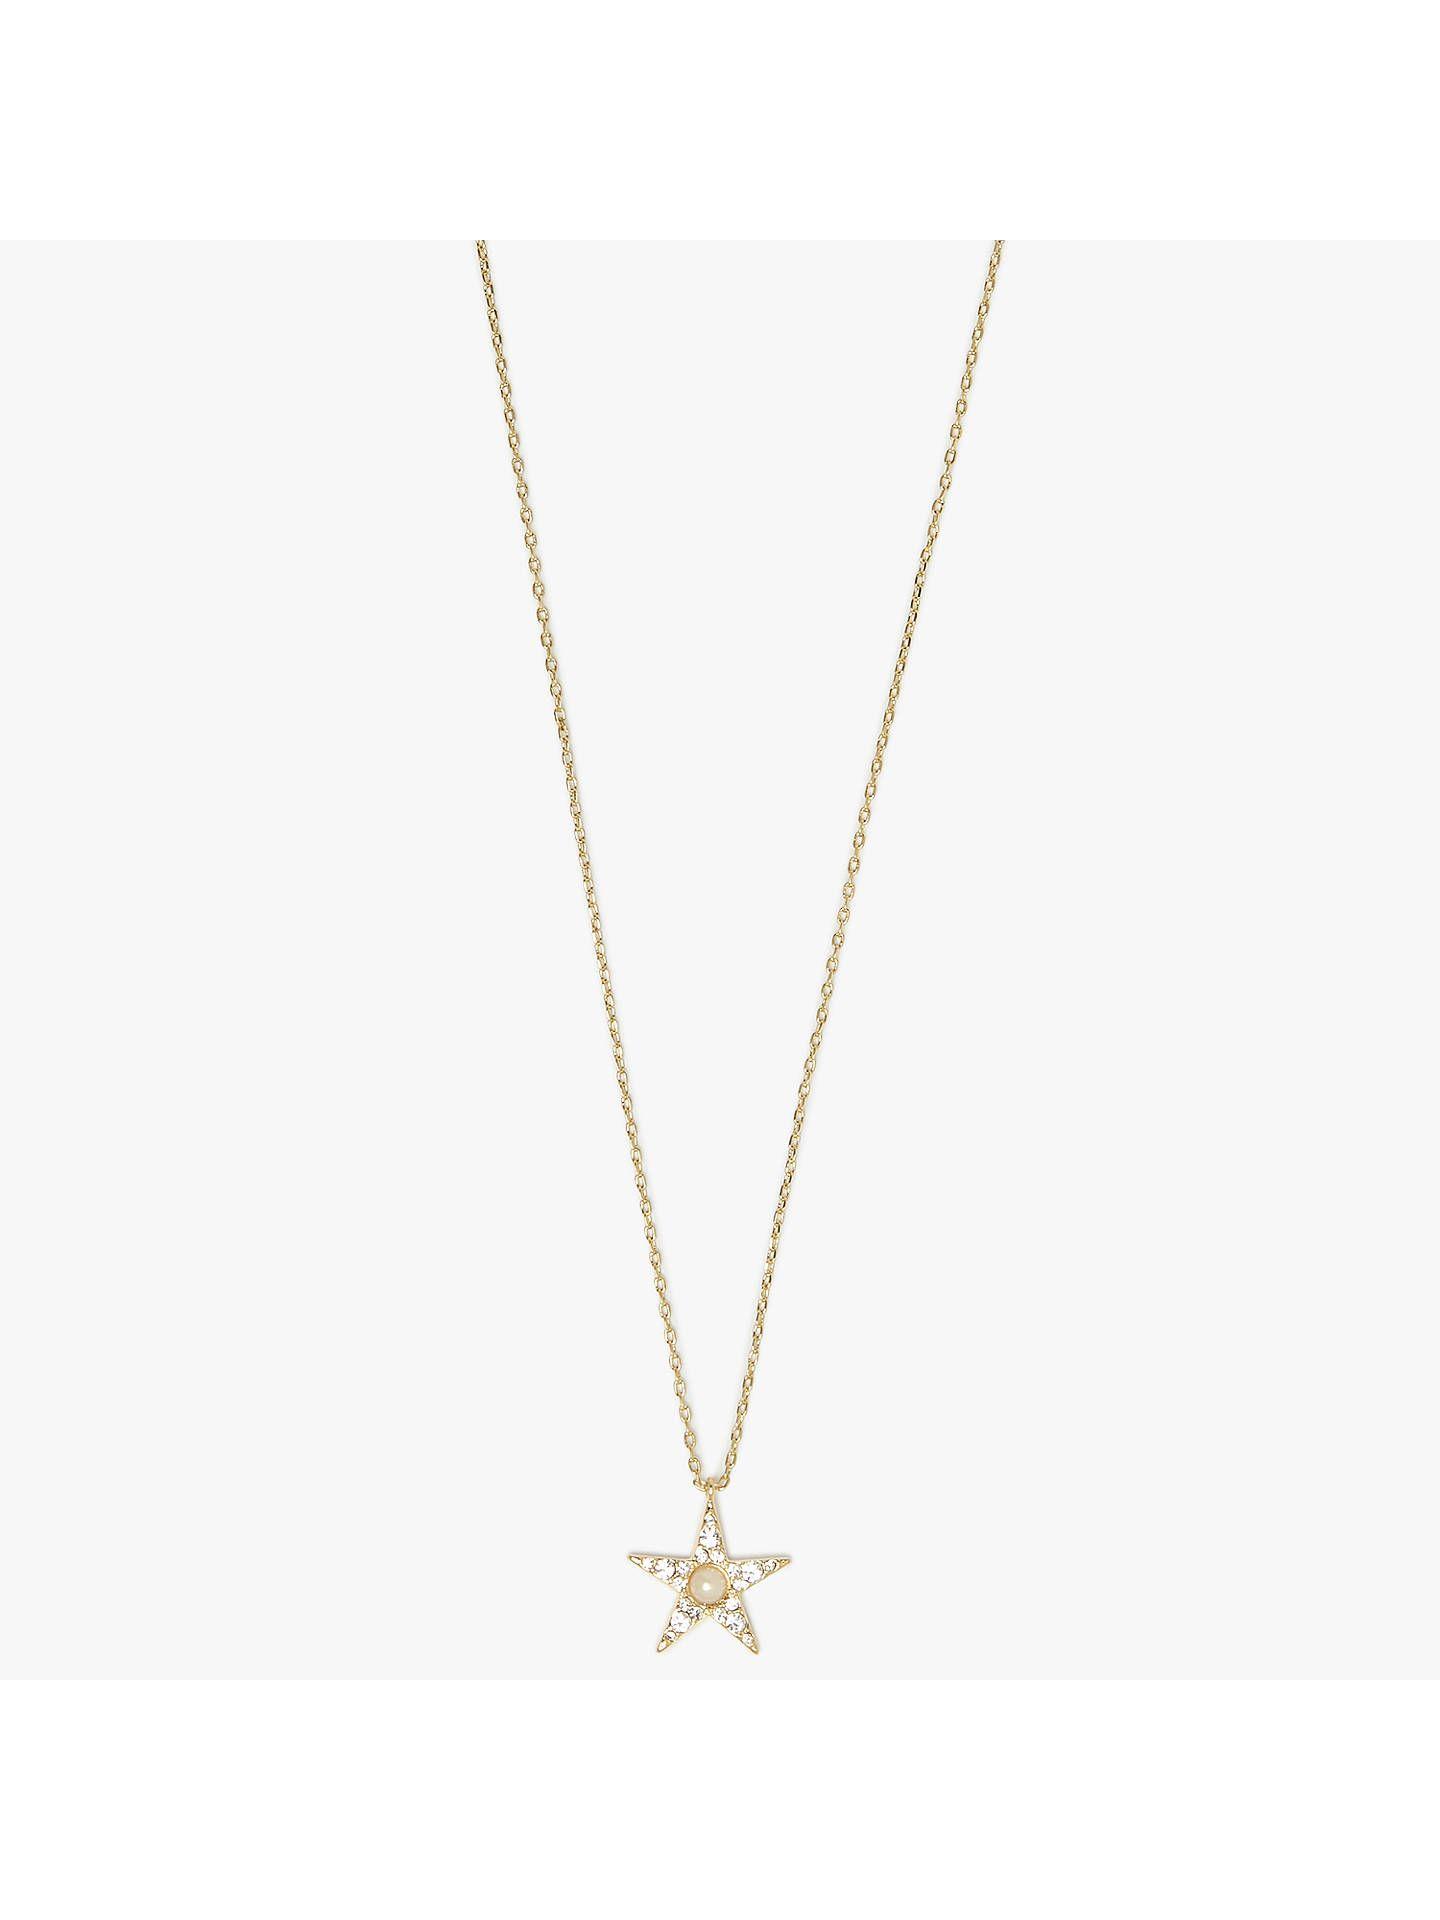 Spade with White Star Logo - kate spade new york Pave Star Pendant Necklace, Rose Gold at John